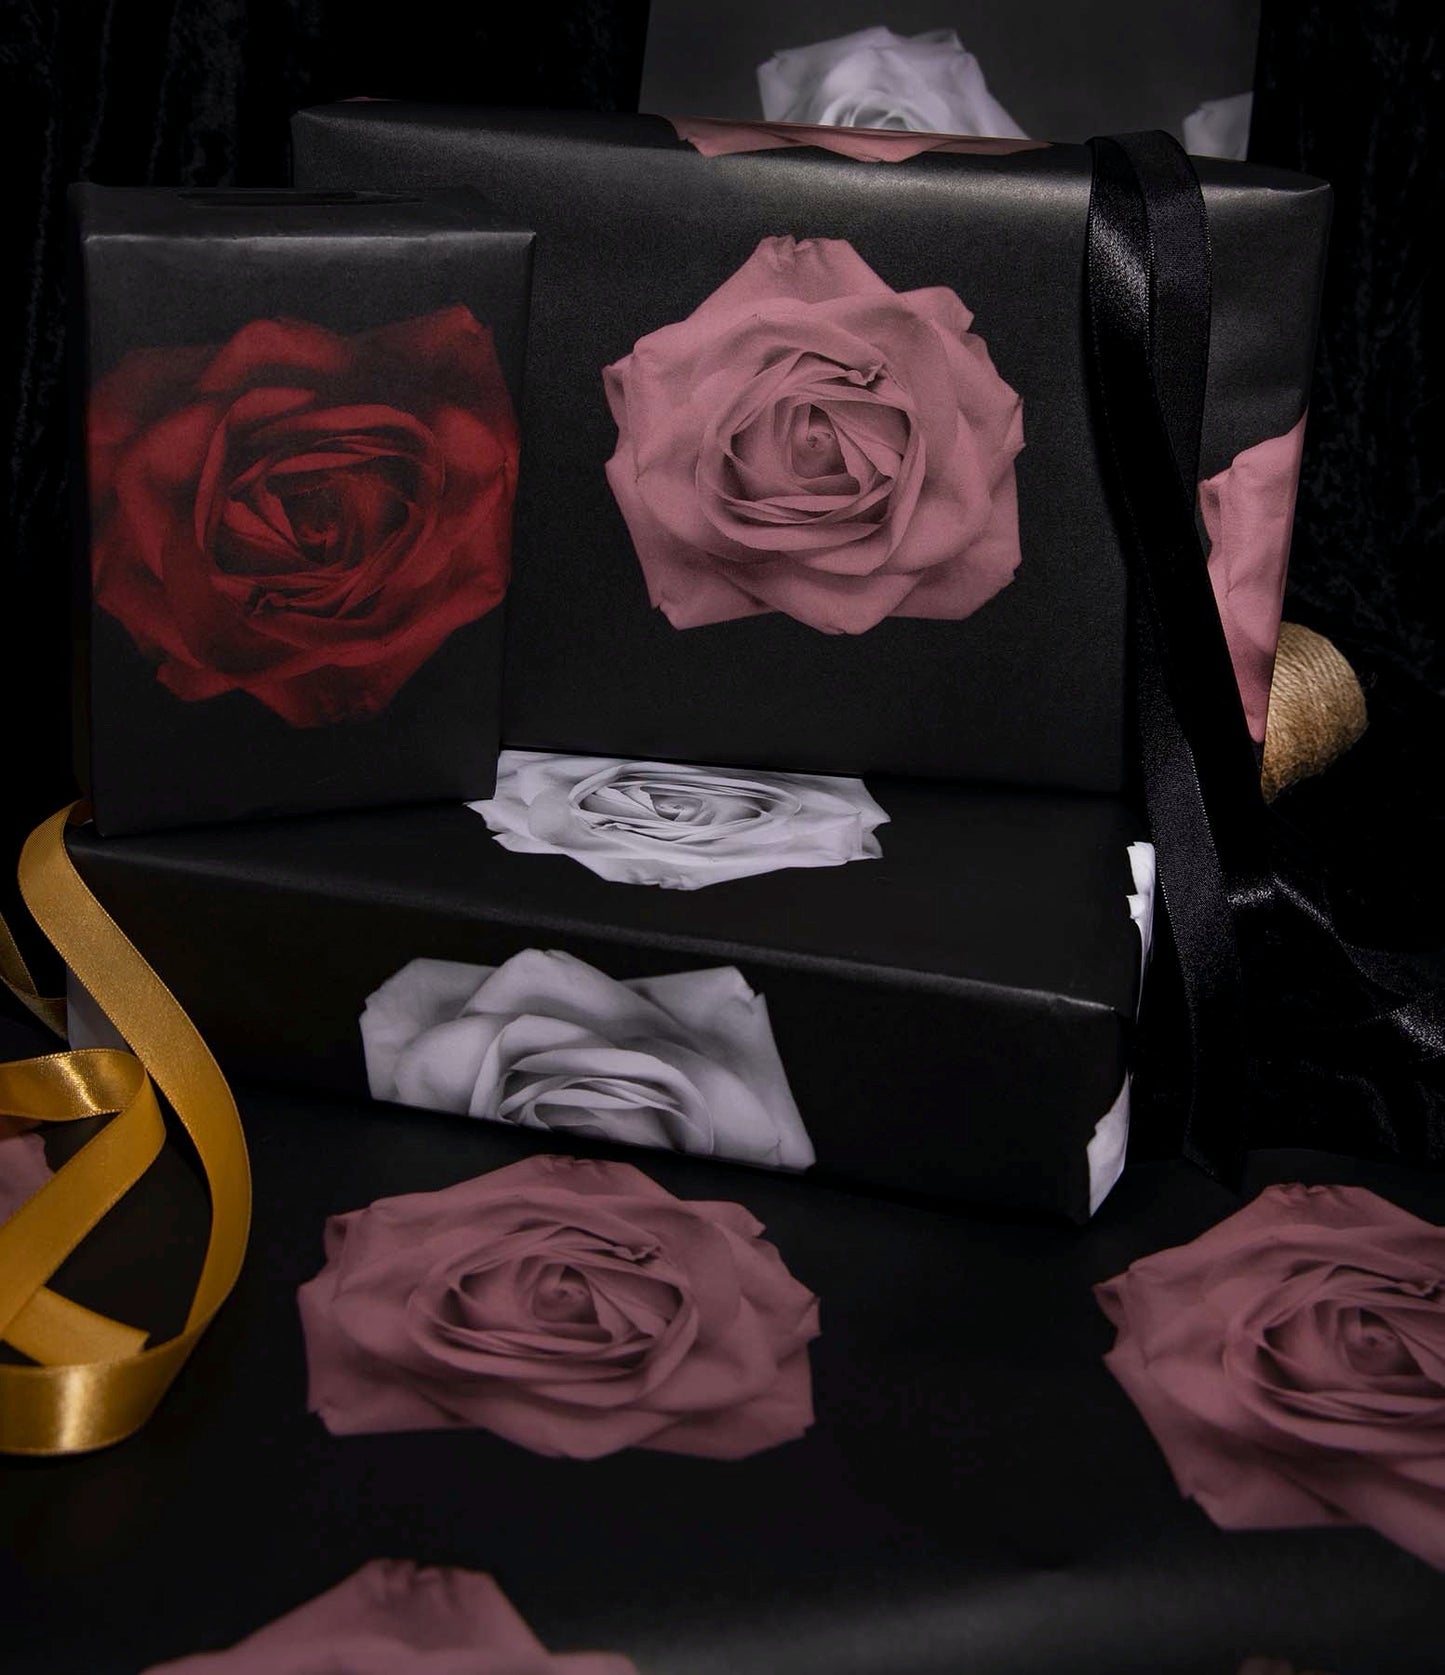 Exquisite  Gothic Red Holiday Rose - Wrapping Paper - Set of 3 Sheets